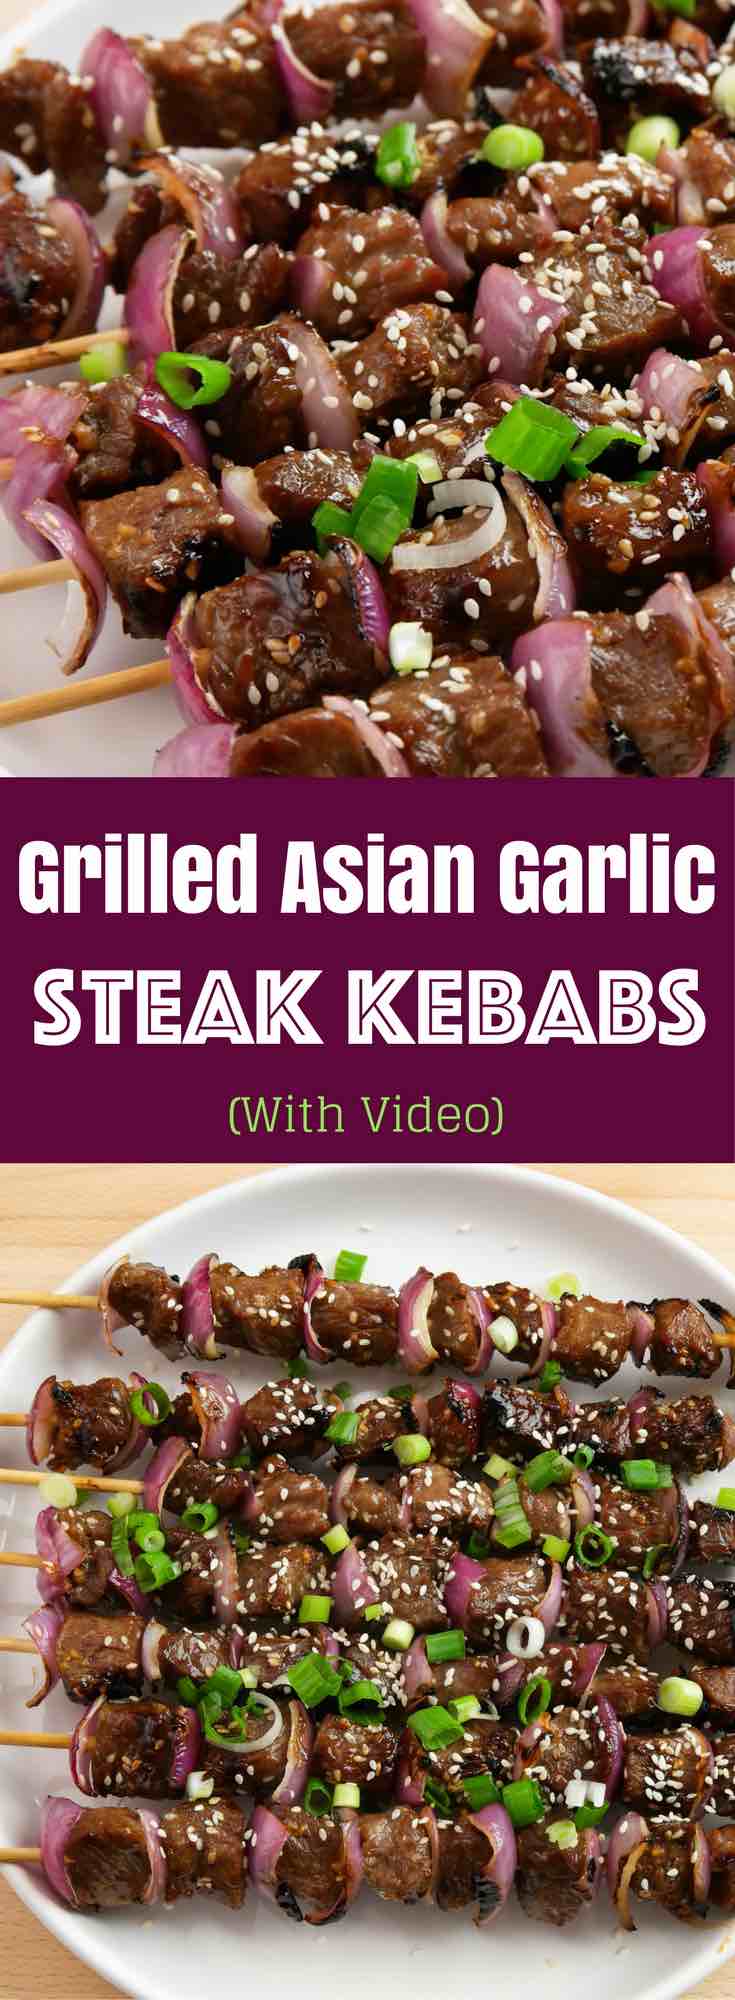 Grilled Asian Garlic Steak Kebabs/Kabobs – Incredibly delicious beef skewers that are so easy to make! Nothing is better than these kebabs to serve on a warm summer day! All you need is some simple recipes: steak, soy sauce, garlic, red onions, green onions, sesame seeds, sugar, giner and oil. So Good! Quick and easy recipe, video recipe. | Tipbuzz.com